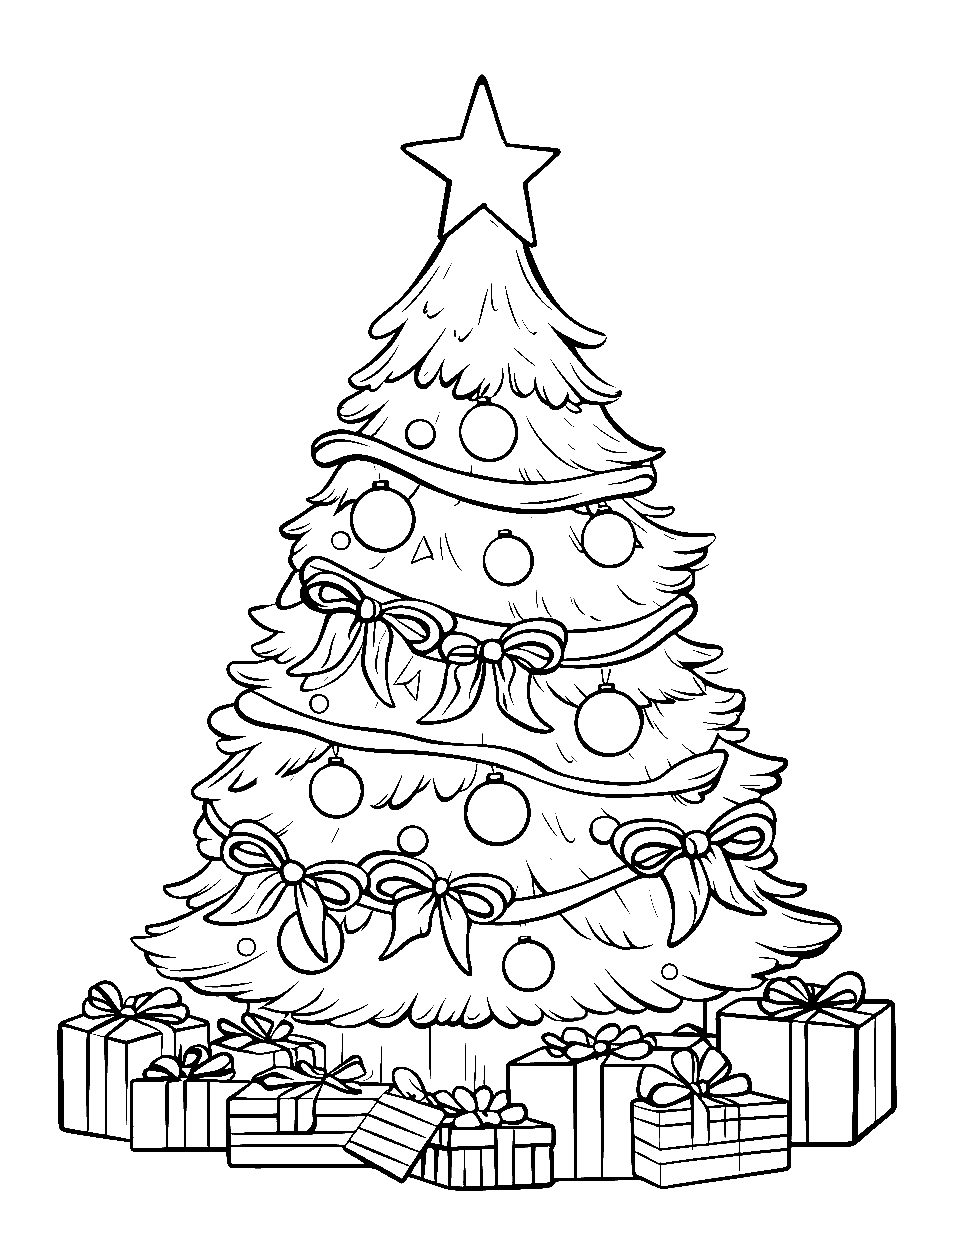 Christmas Tree Drawing With Four Colored Pencils On Paper Background,  Picture Of A Christmas Tree Drawing, Christmas, Christmas Tree Background  Image And Wallpaper for Free Download